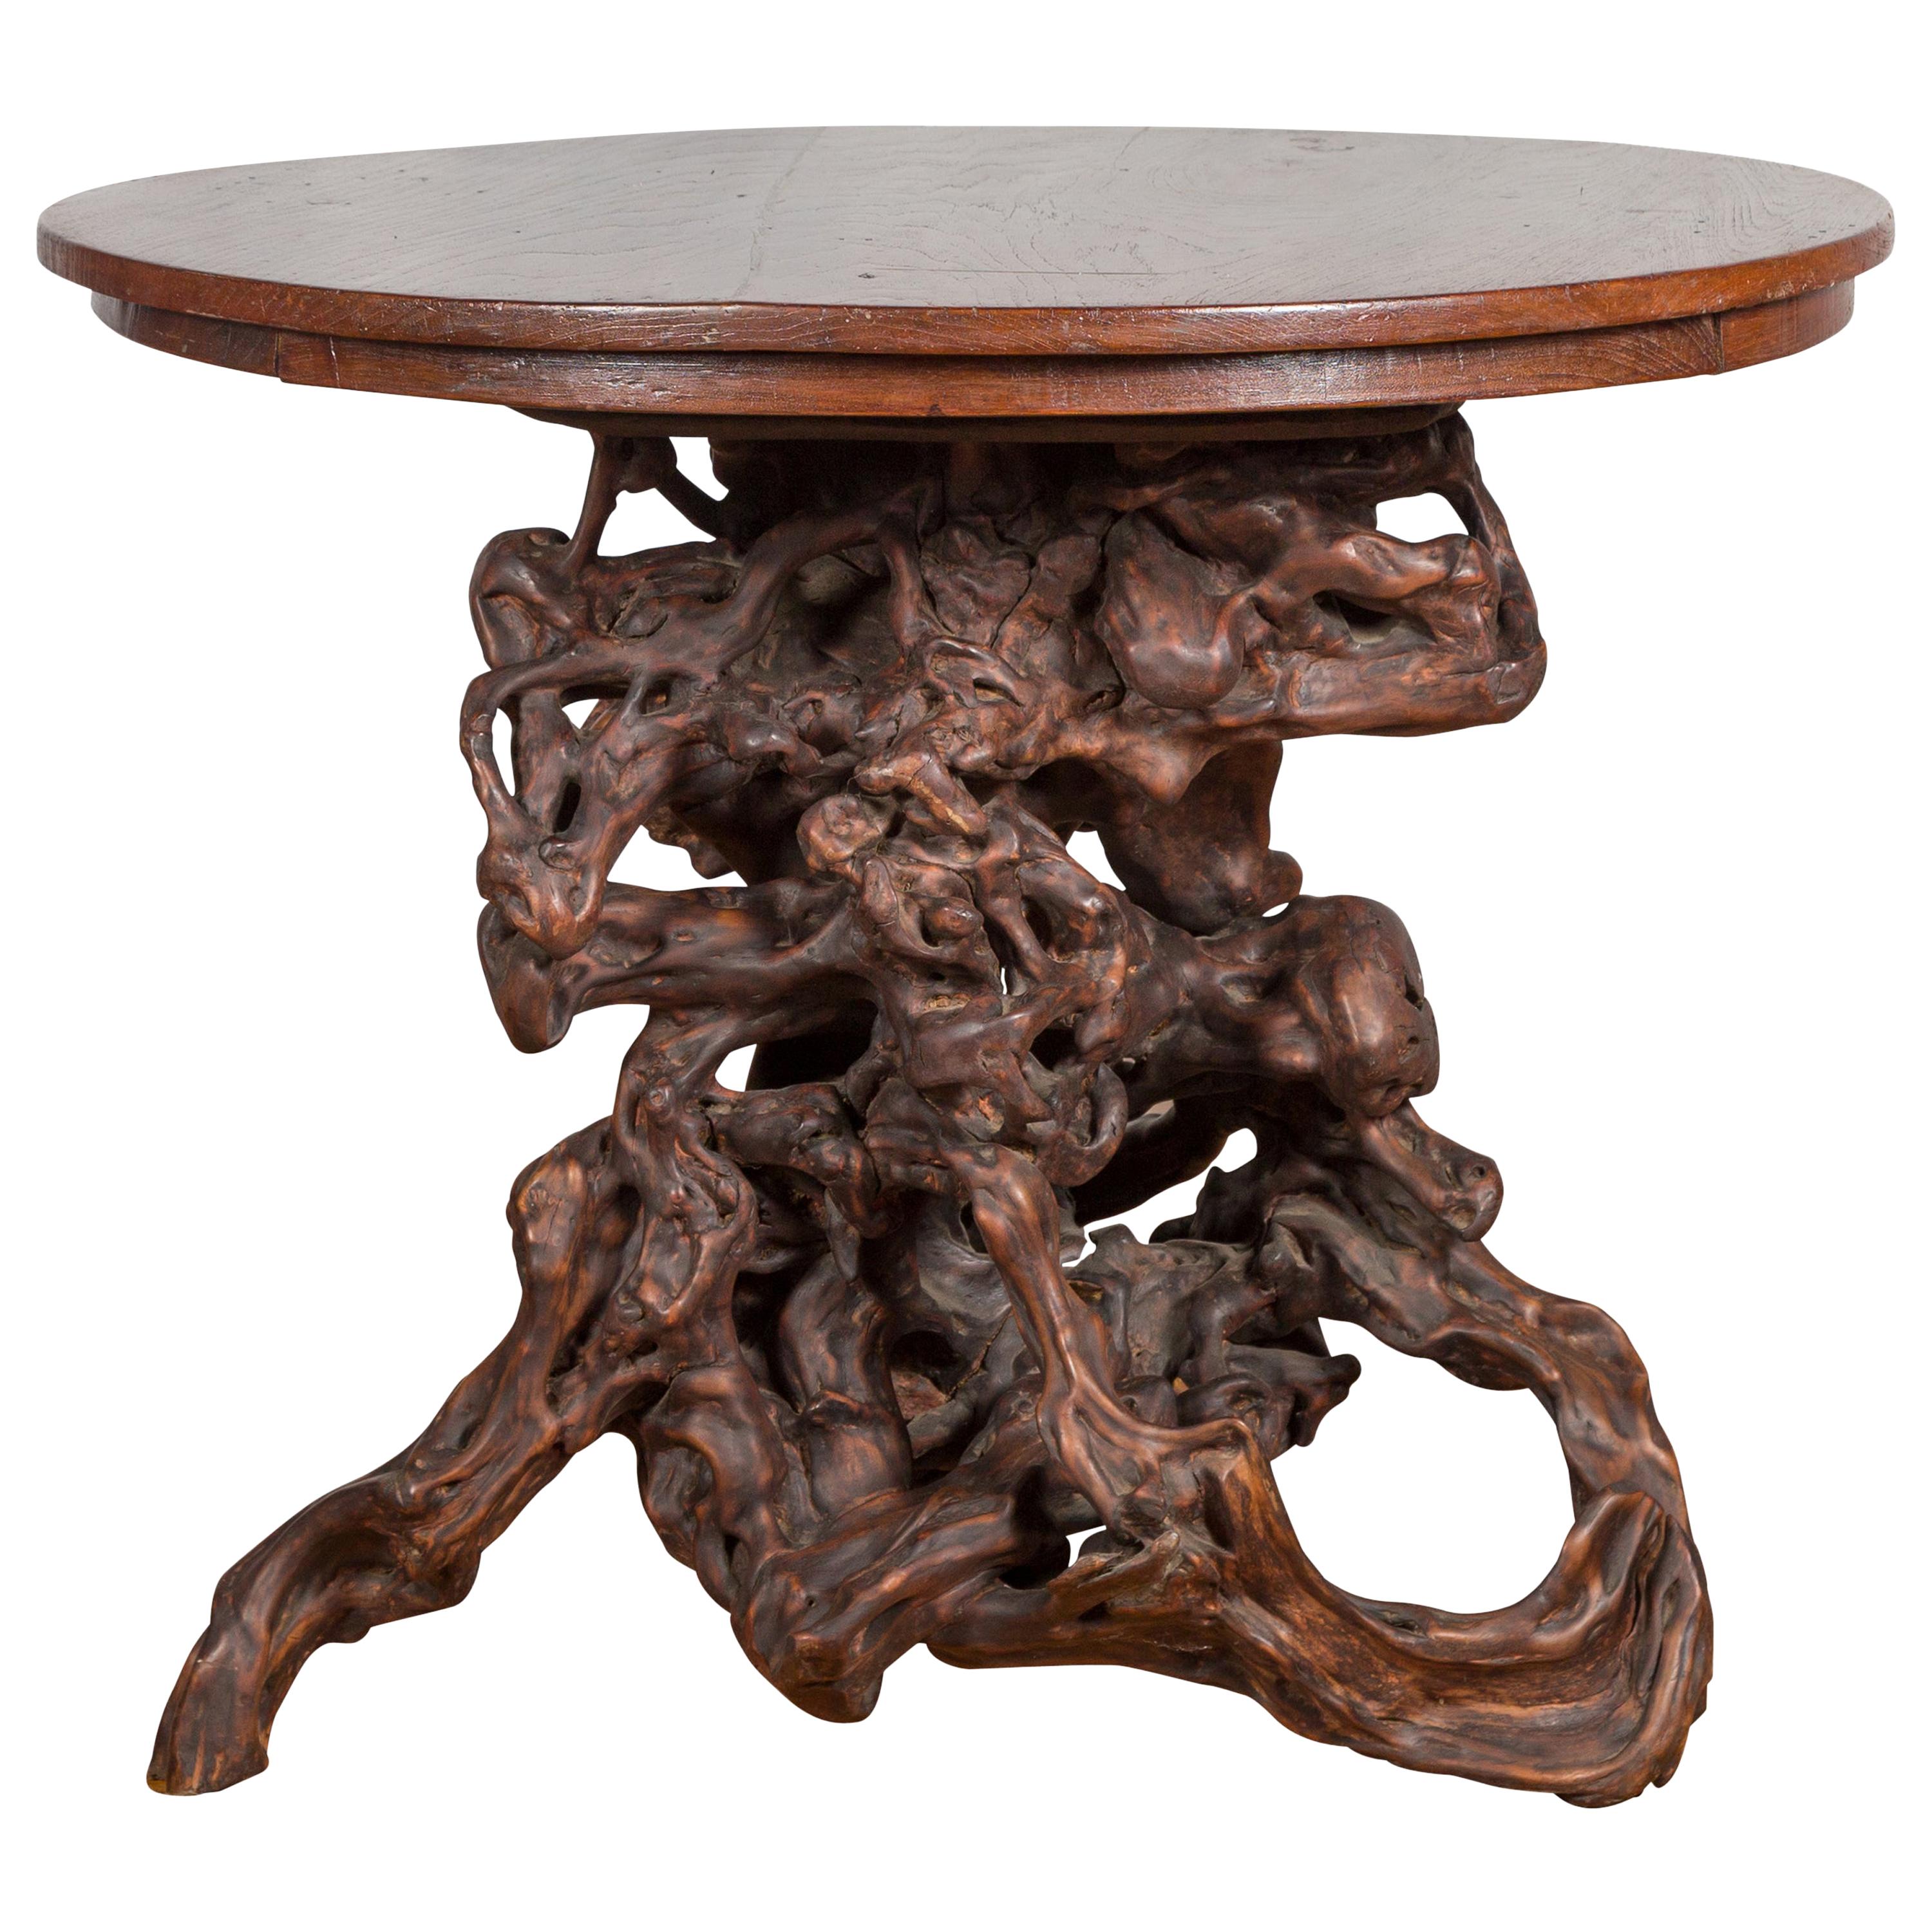 Antique Chinese Rustic Root Table with Circular Top and Dark Patina